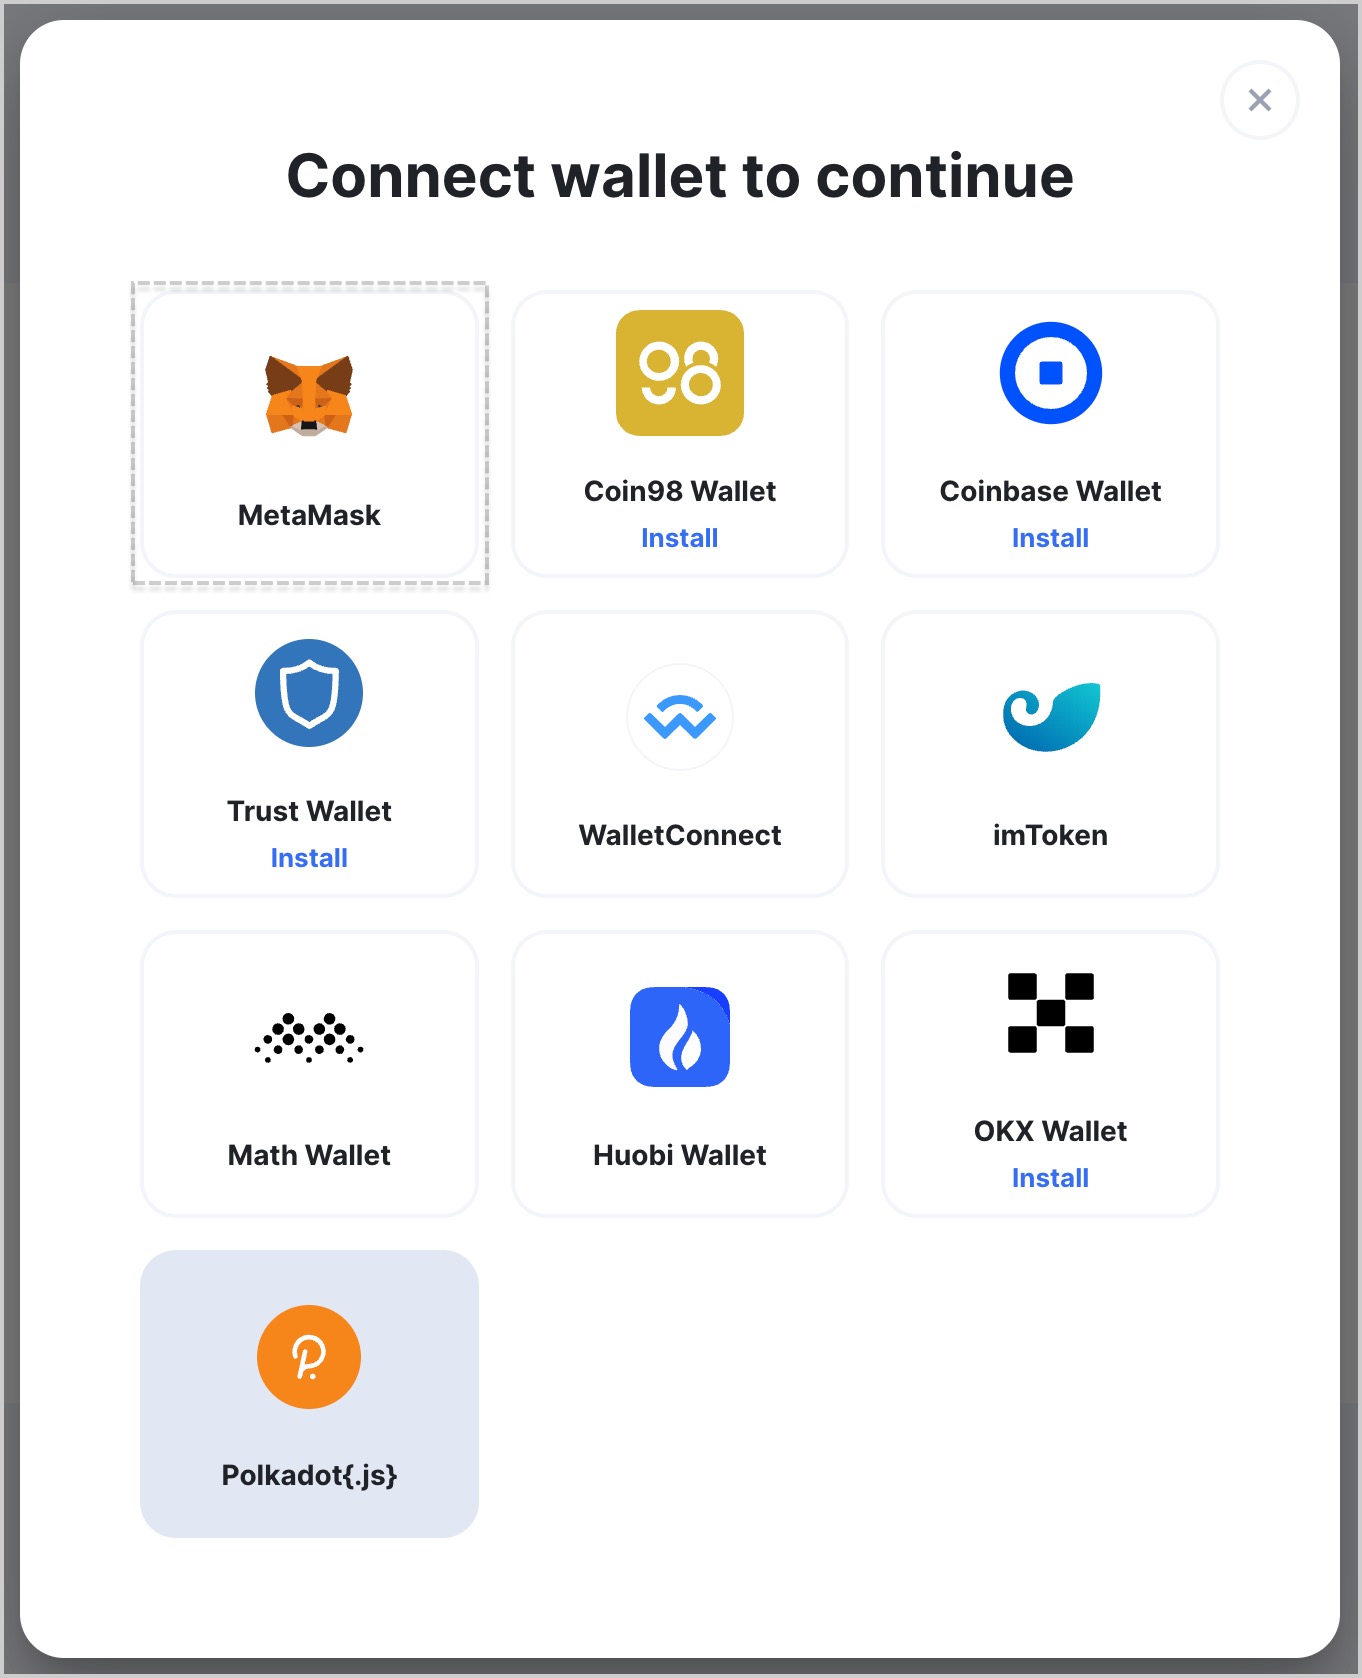 Connect wallet button